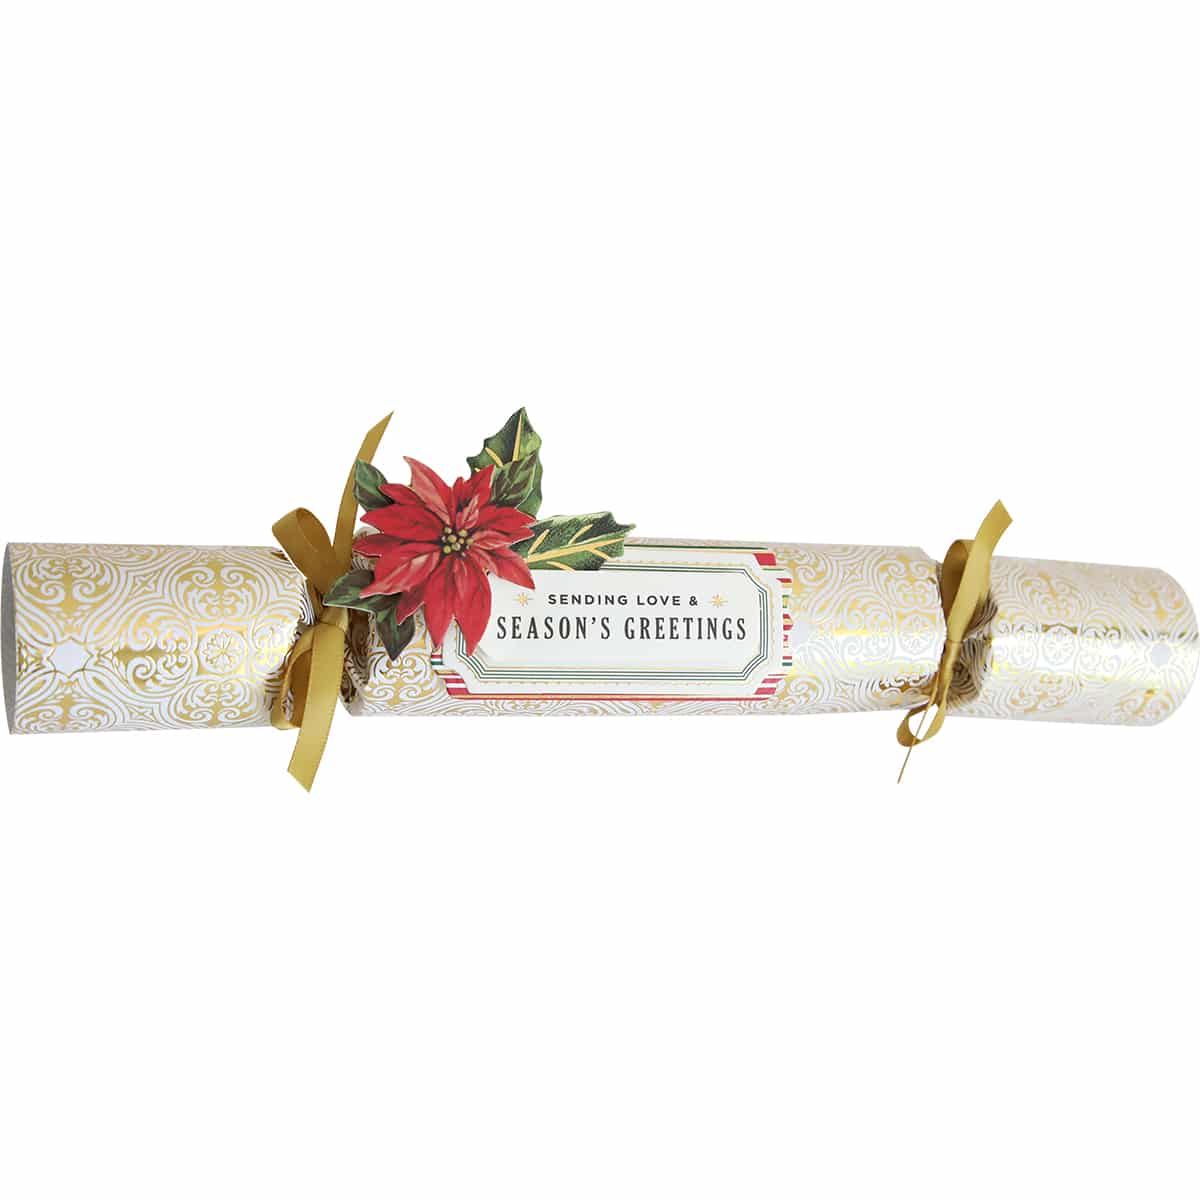 A Christmas Crackers Dies with poinsettias on it.